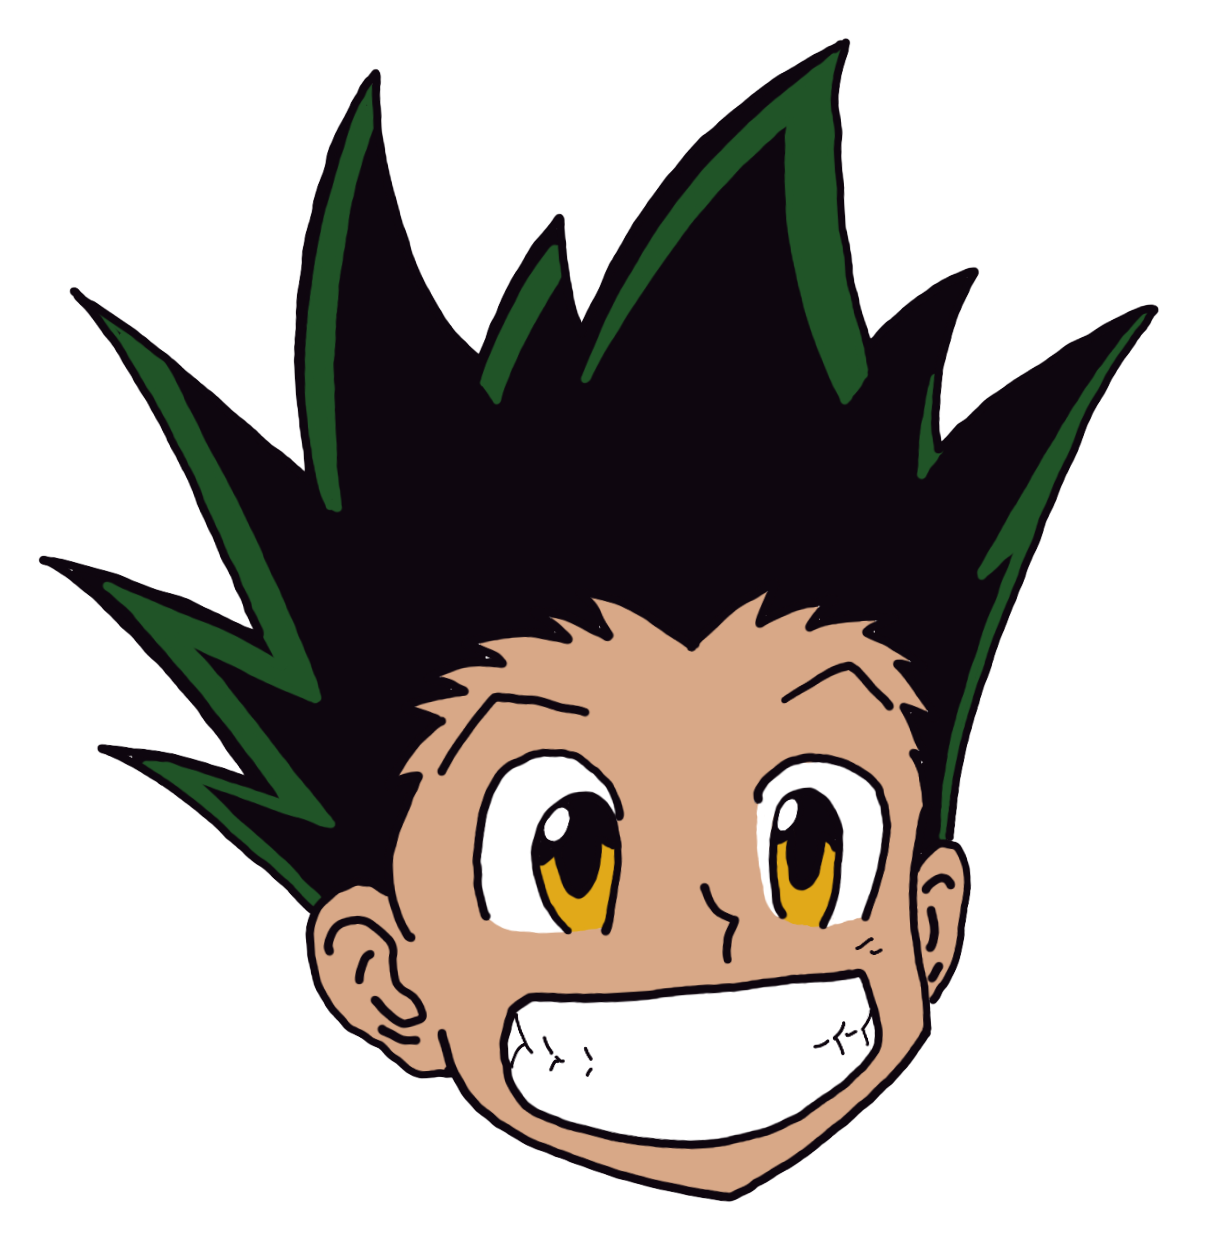 gon freecs doodle with the biggest smile ever